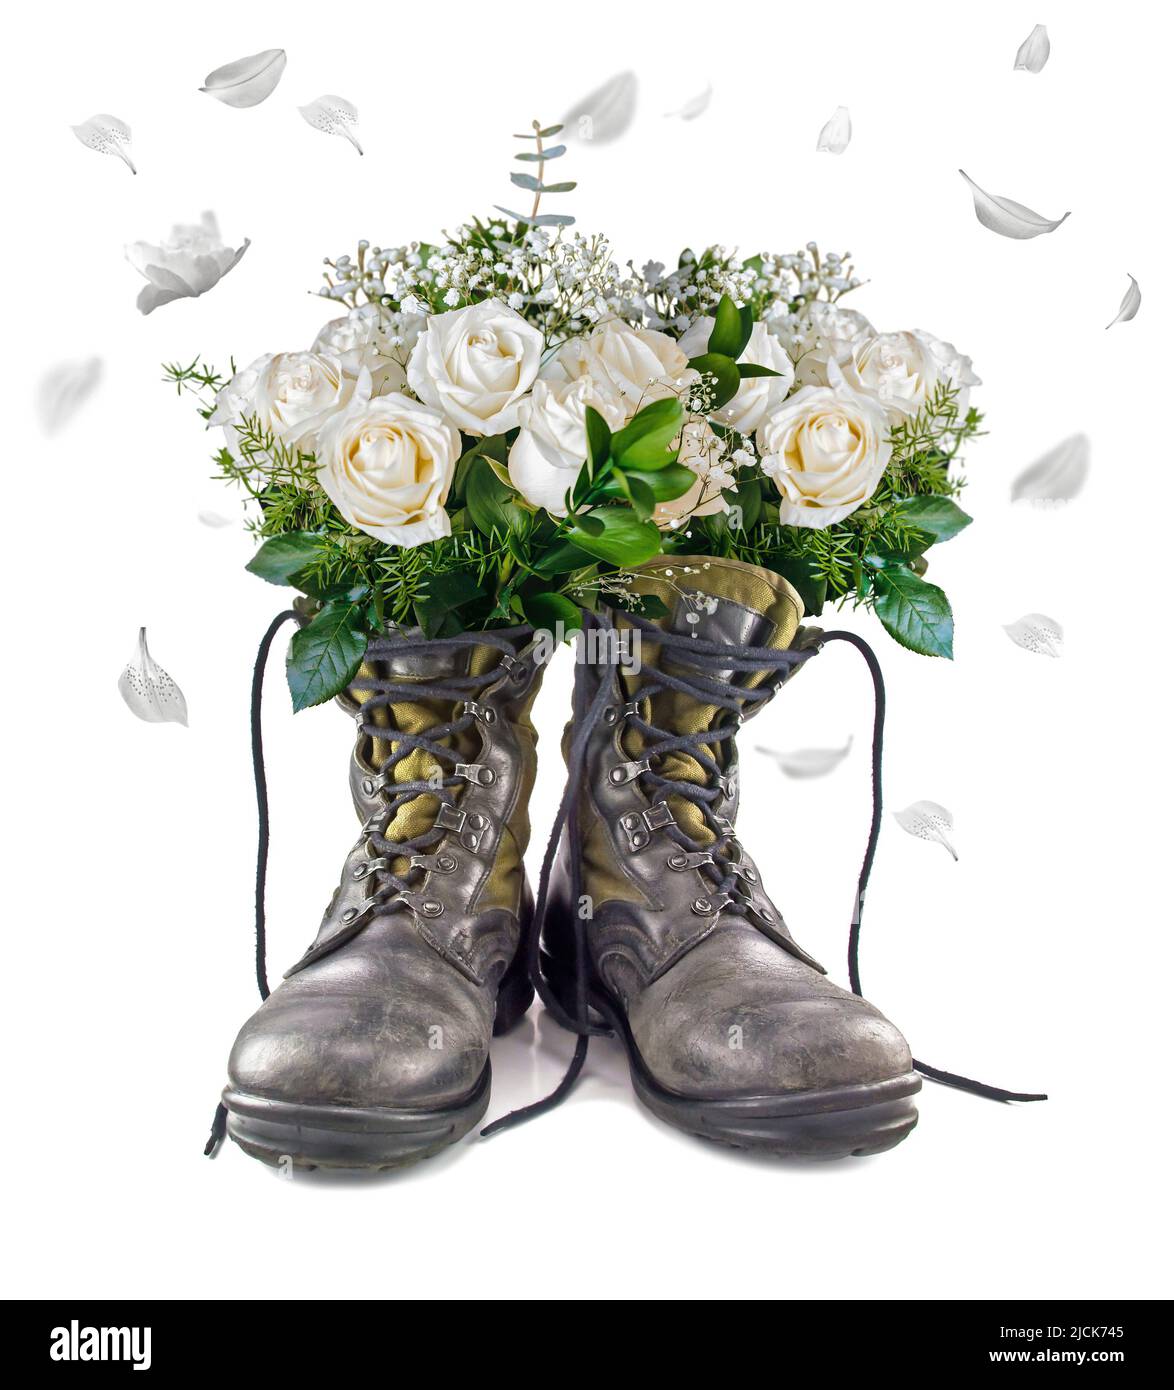 Stop the wars. Military boots. Military boot with bloom inside. World peace. White roses. Falling withered rose petals. Army boots isolated on white. Stock Photo